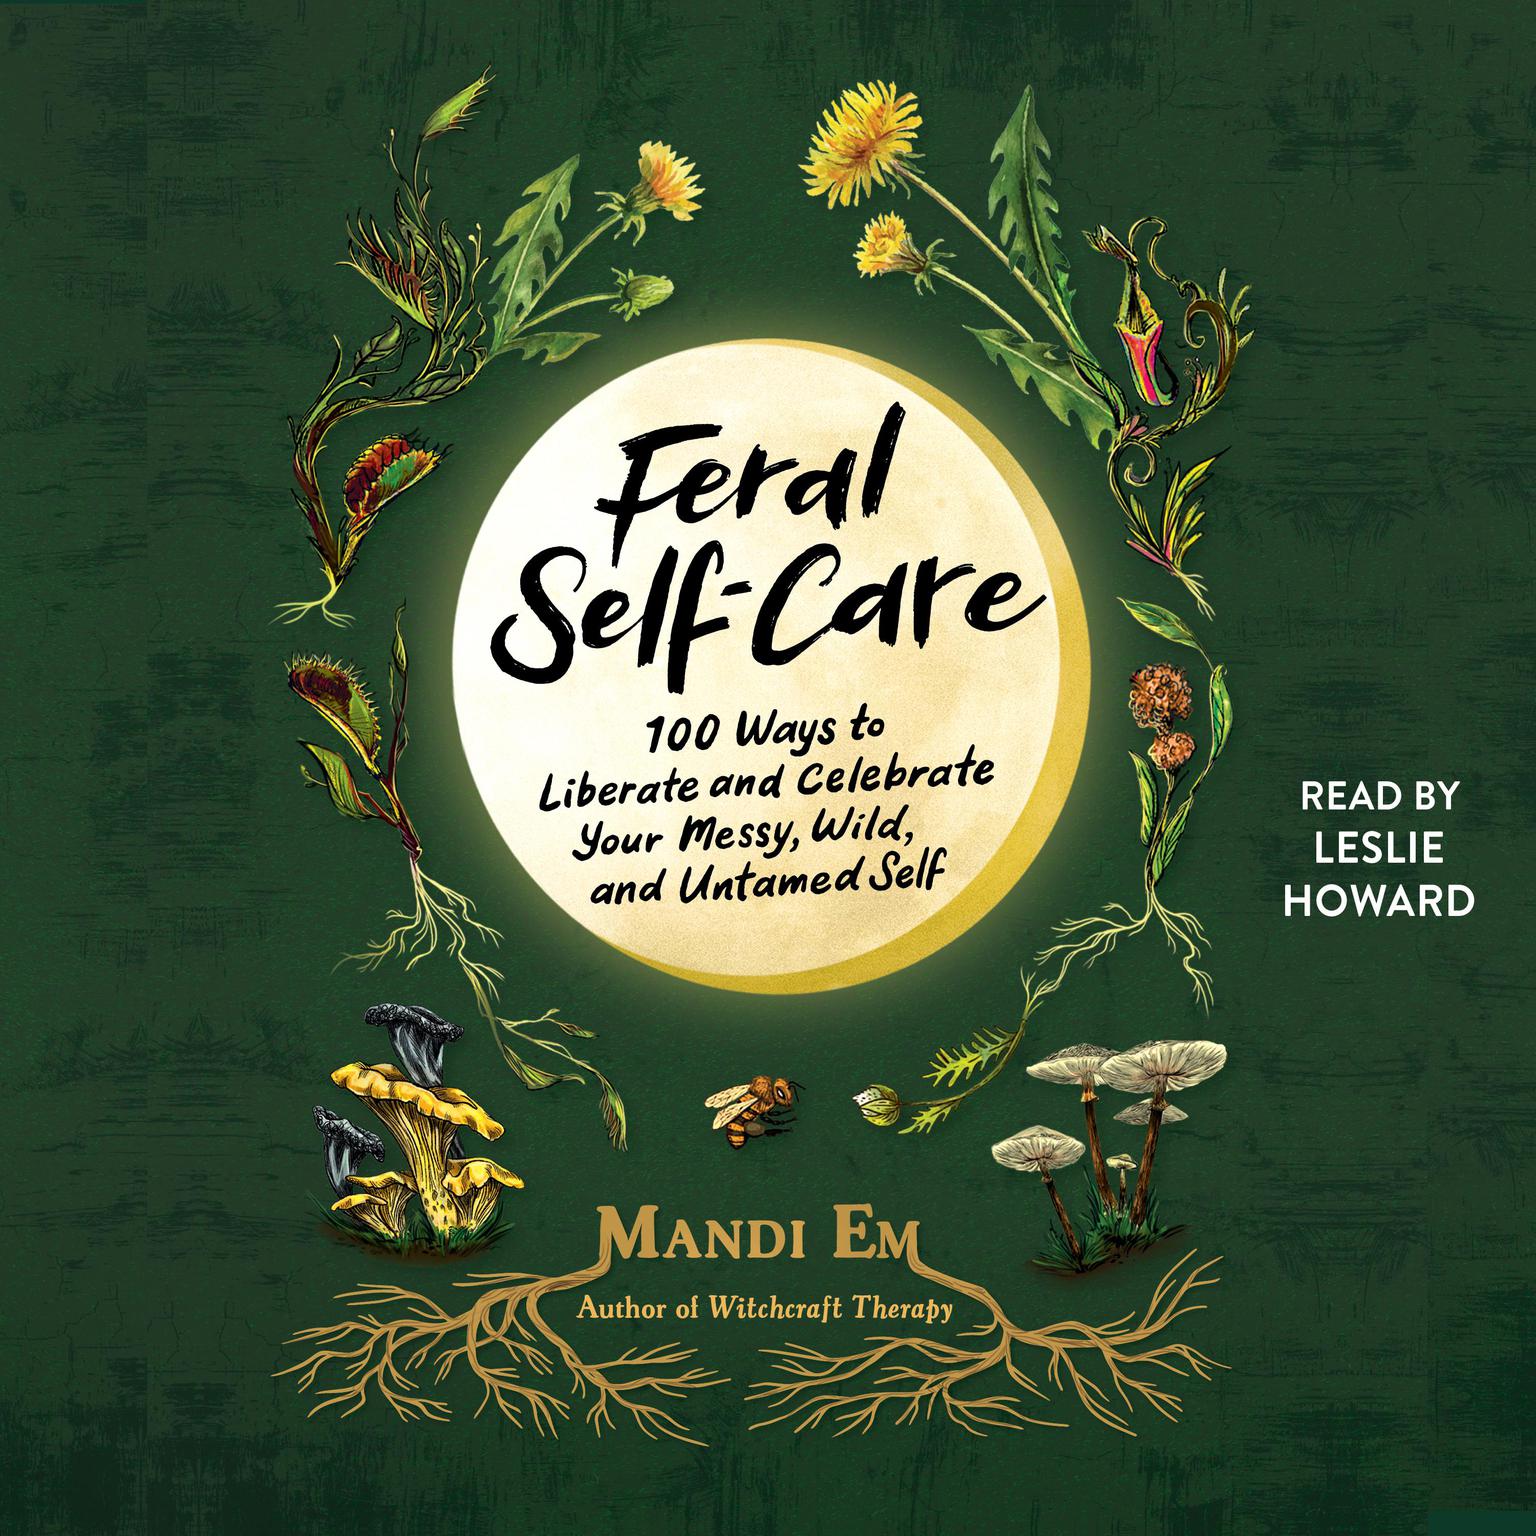 Feral Self-Care: 100 Ways to Liberate and Celebrate Your Messy, Wild, and Untamed Self Audiobook, by Mandi Em